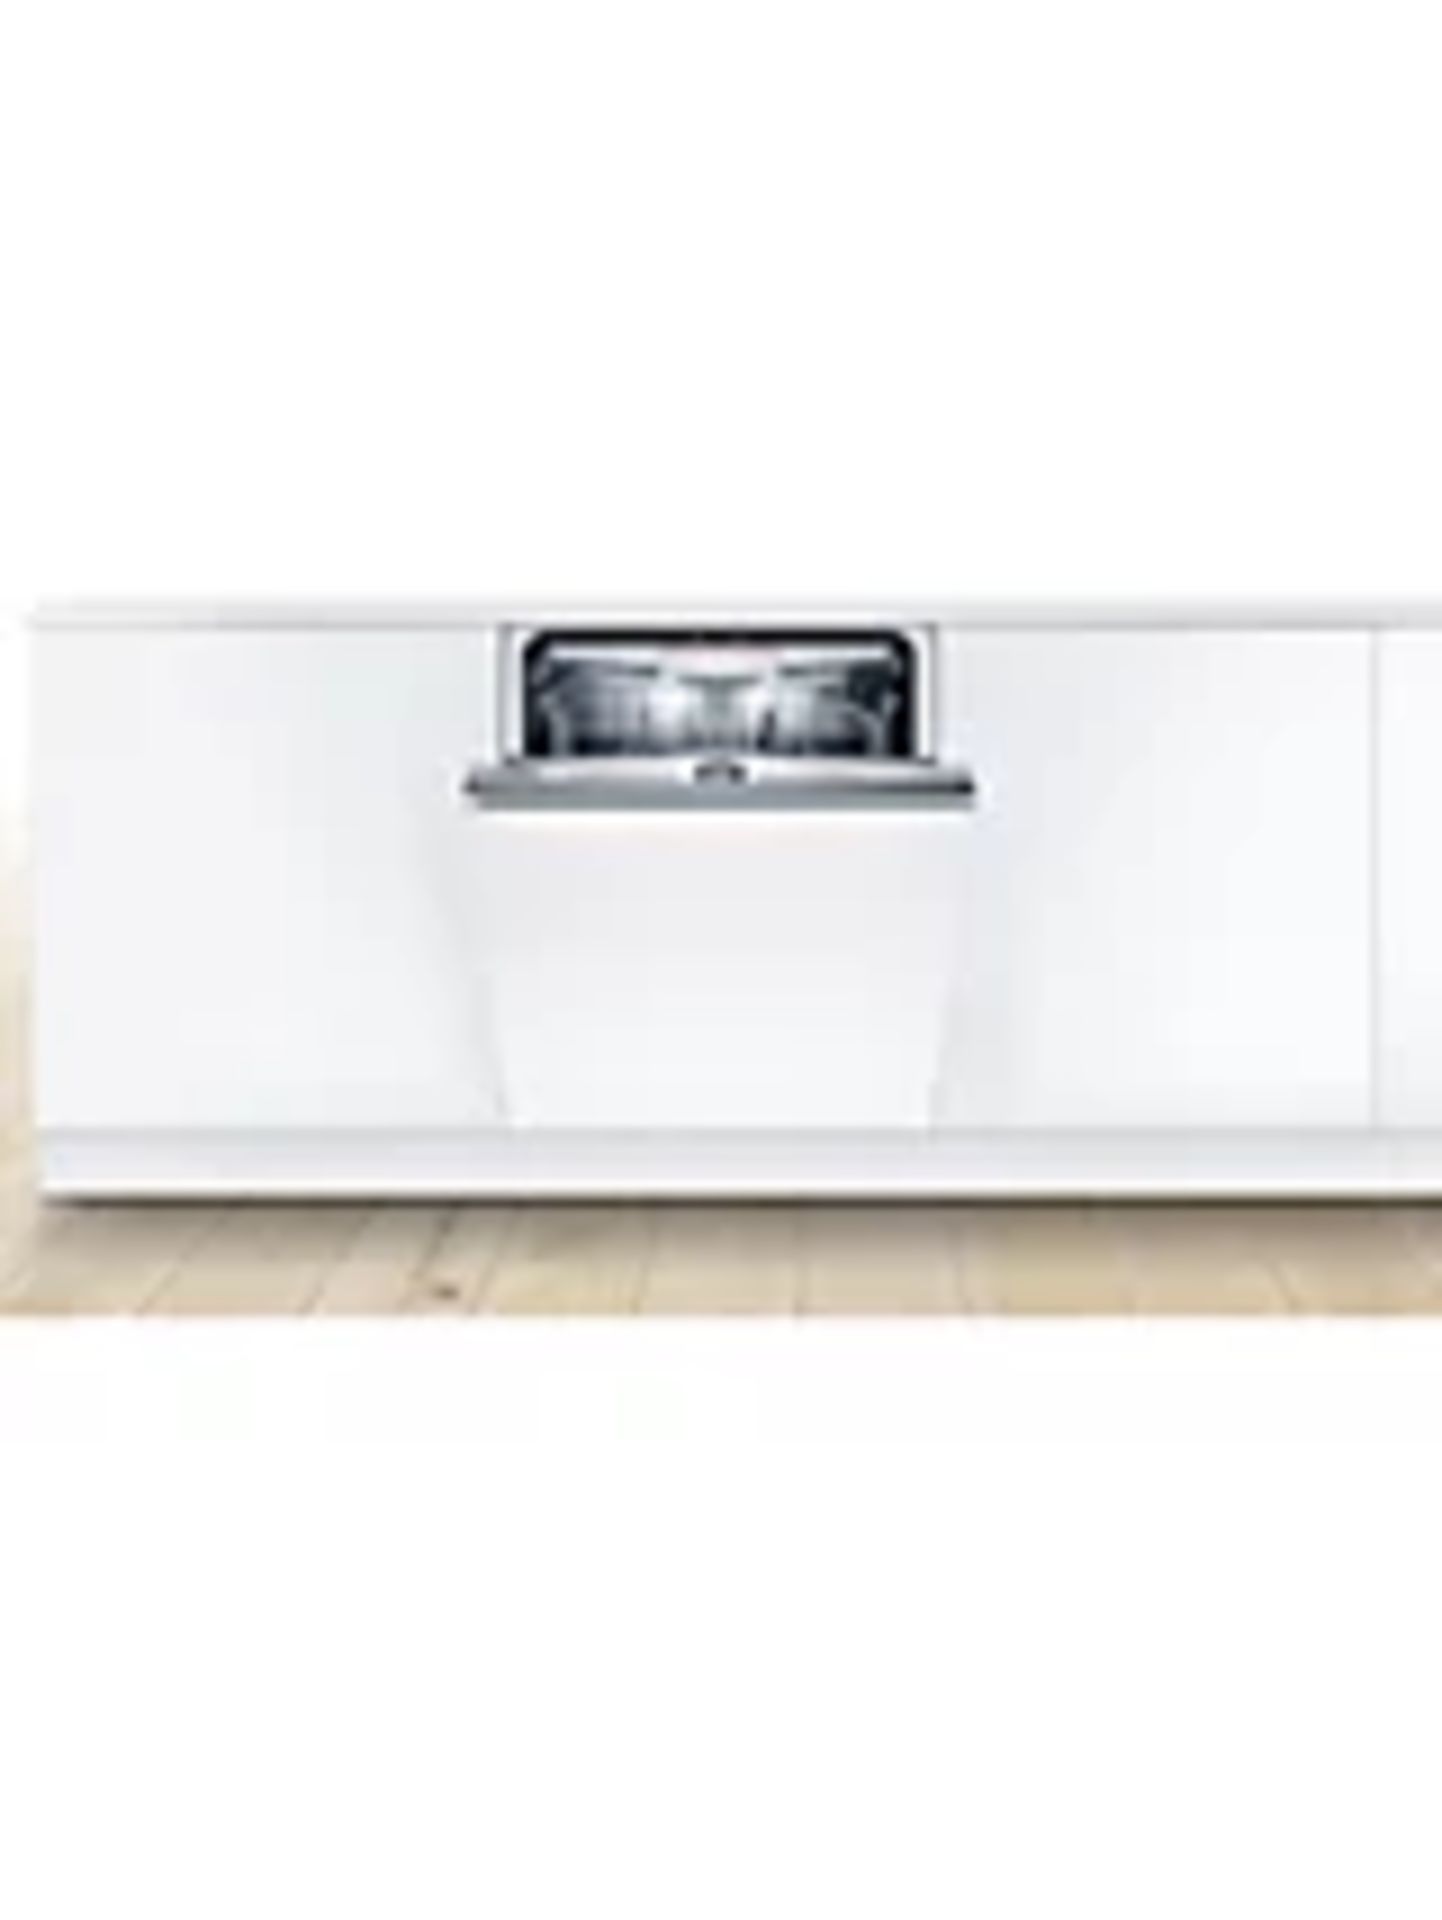 Grade B Bosch Serie 4 SGV4HCX40G Fully Integrated Dishwasher - RRP: £629